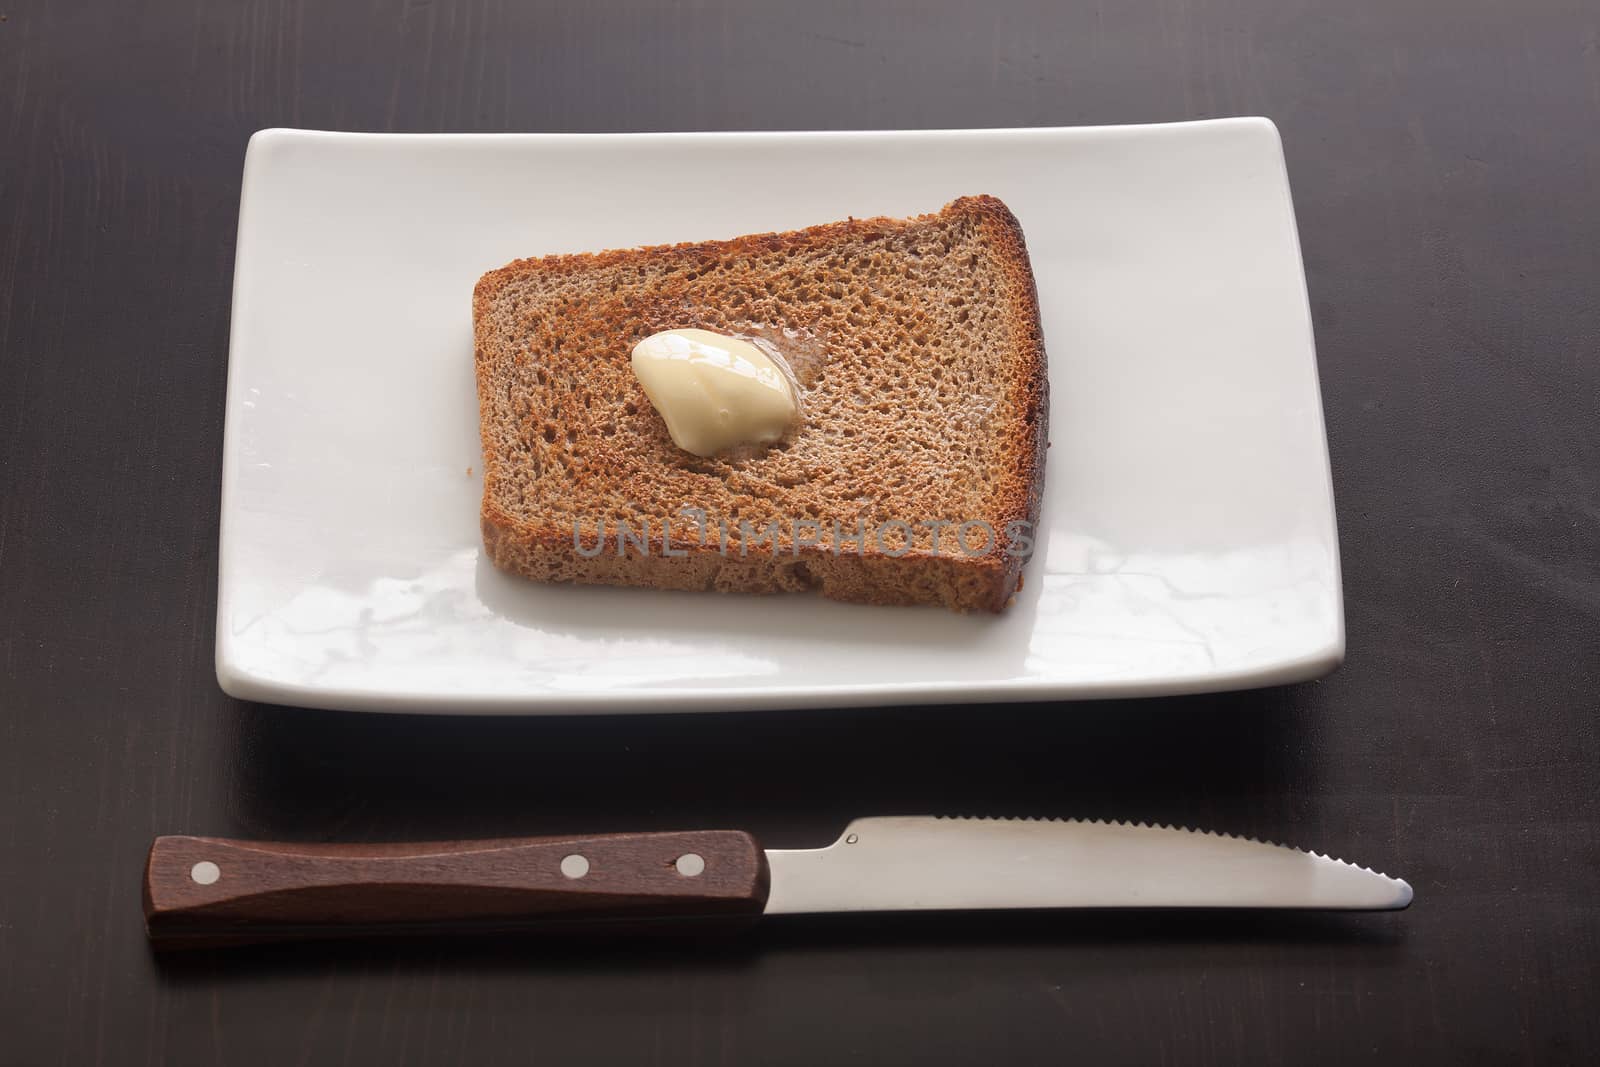 Toasted rye bread on the white plate by Angorius